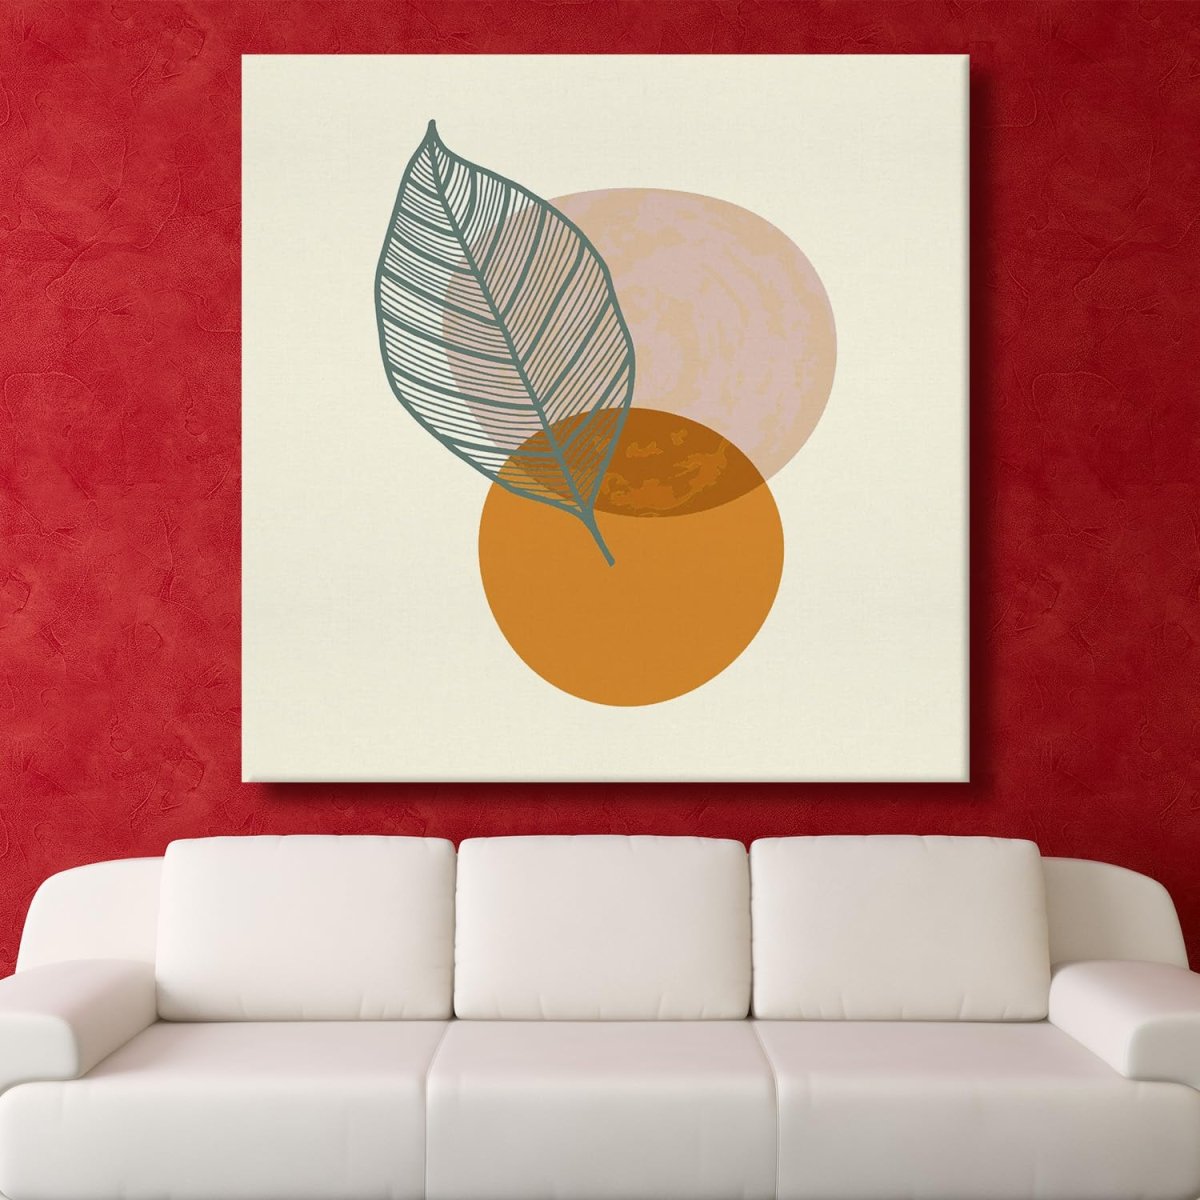 Solitary Leaf and Azure Orbs Canvas Wall Painting (36 x 36 Inches)